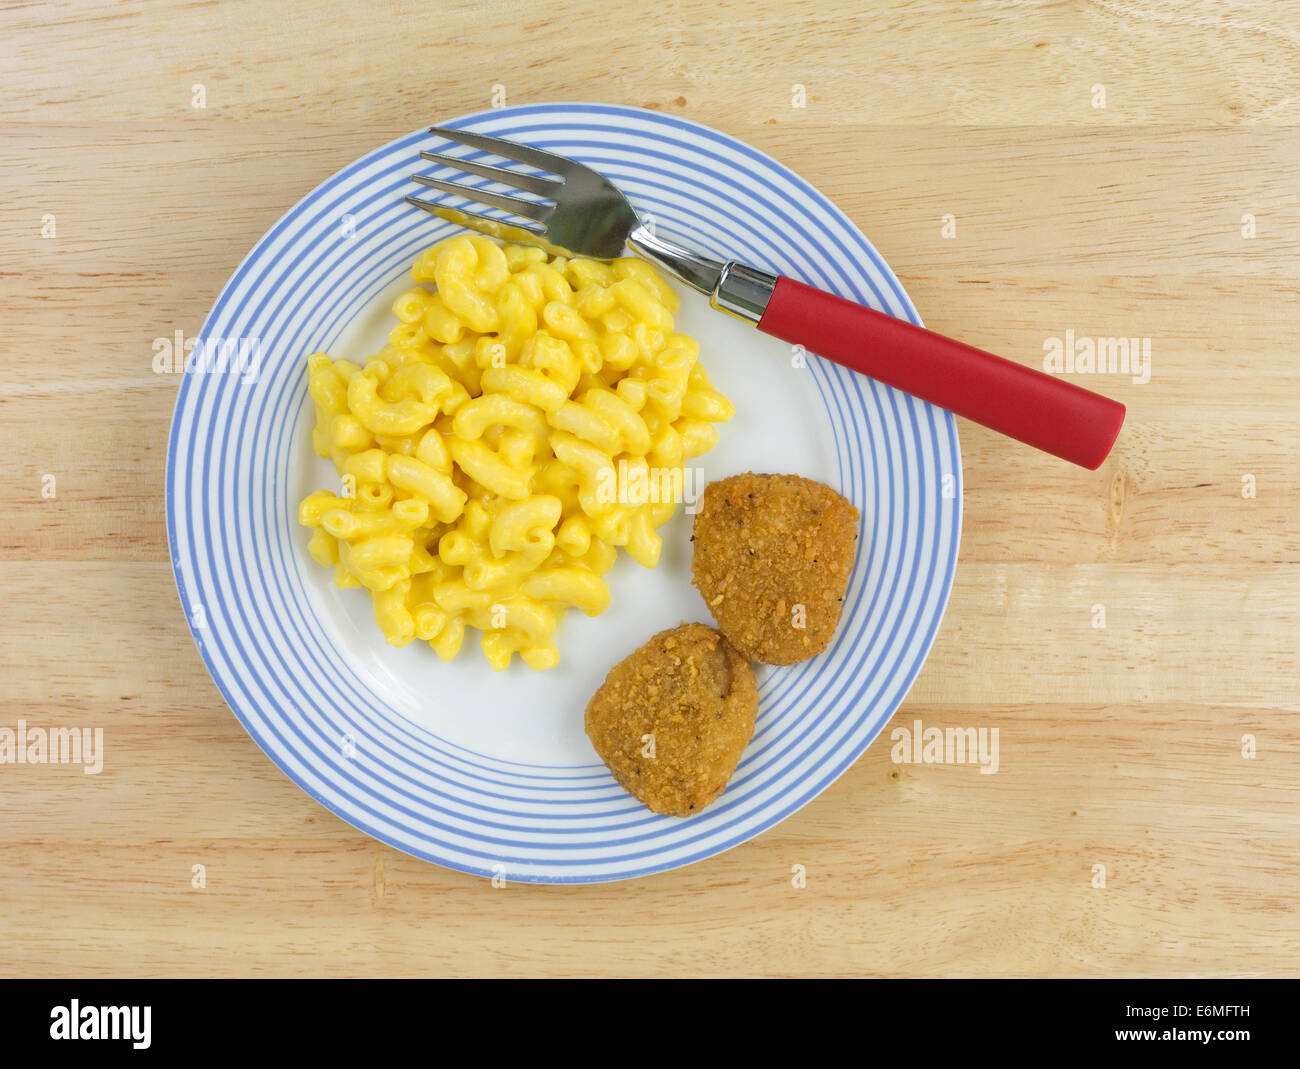 Top view of a meal of macaroni and cheese with two chicken nuggets on a blue striped plate with a red handled fork on a wood tab Stock Photo